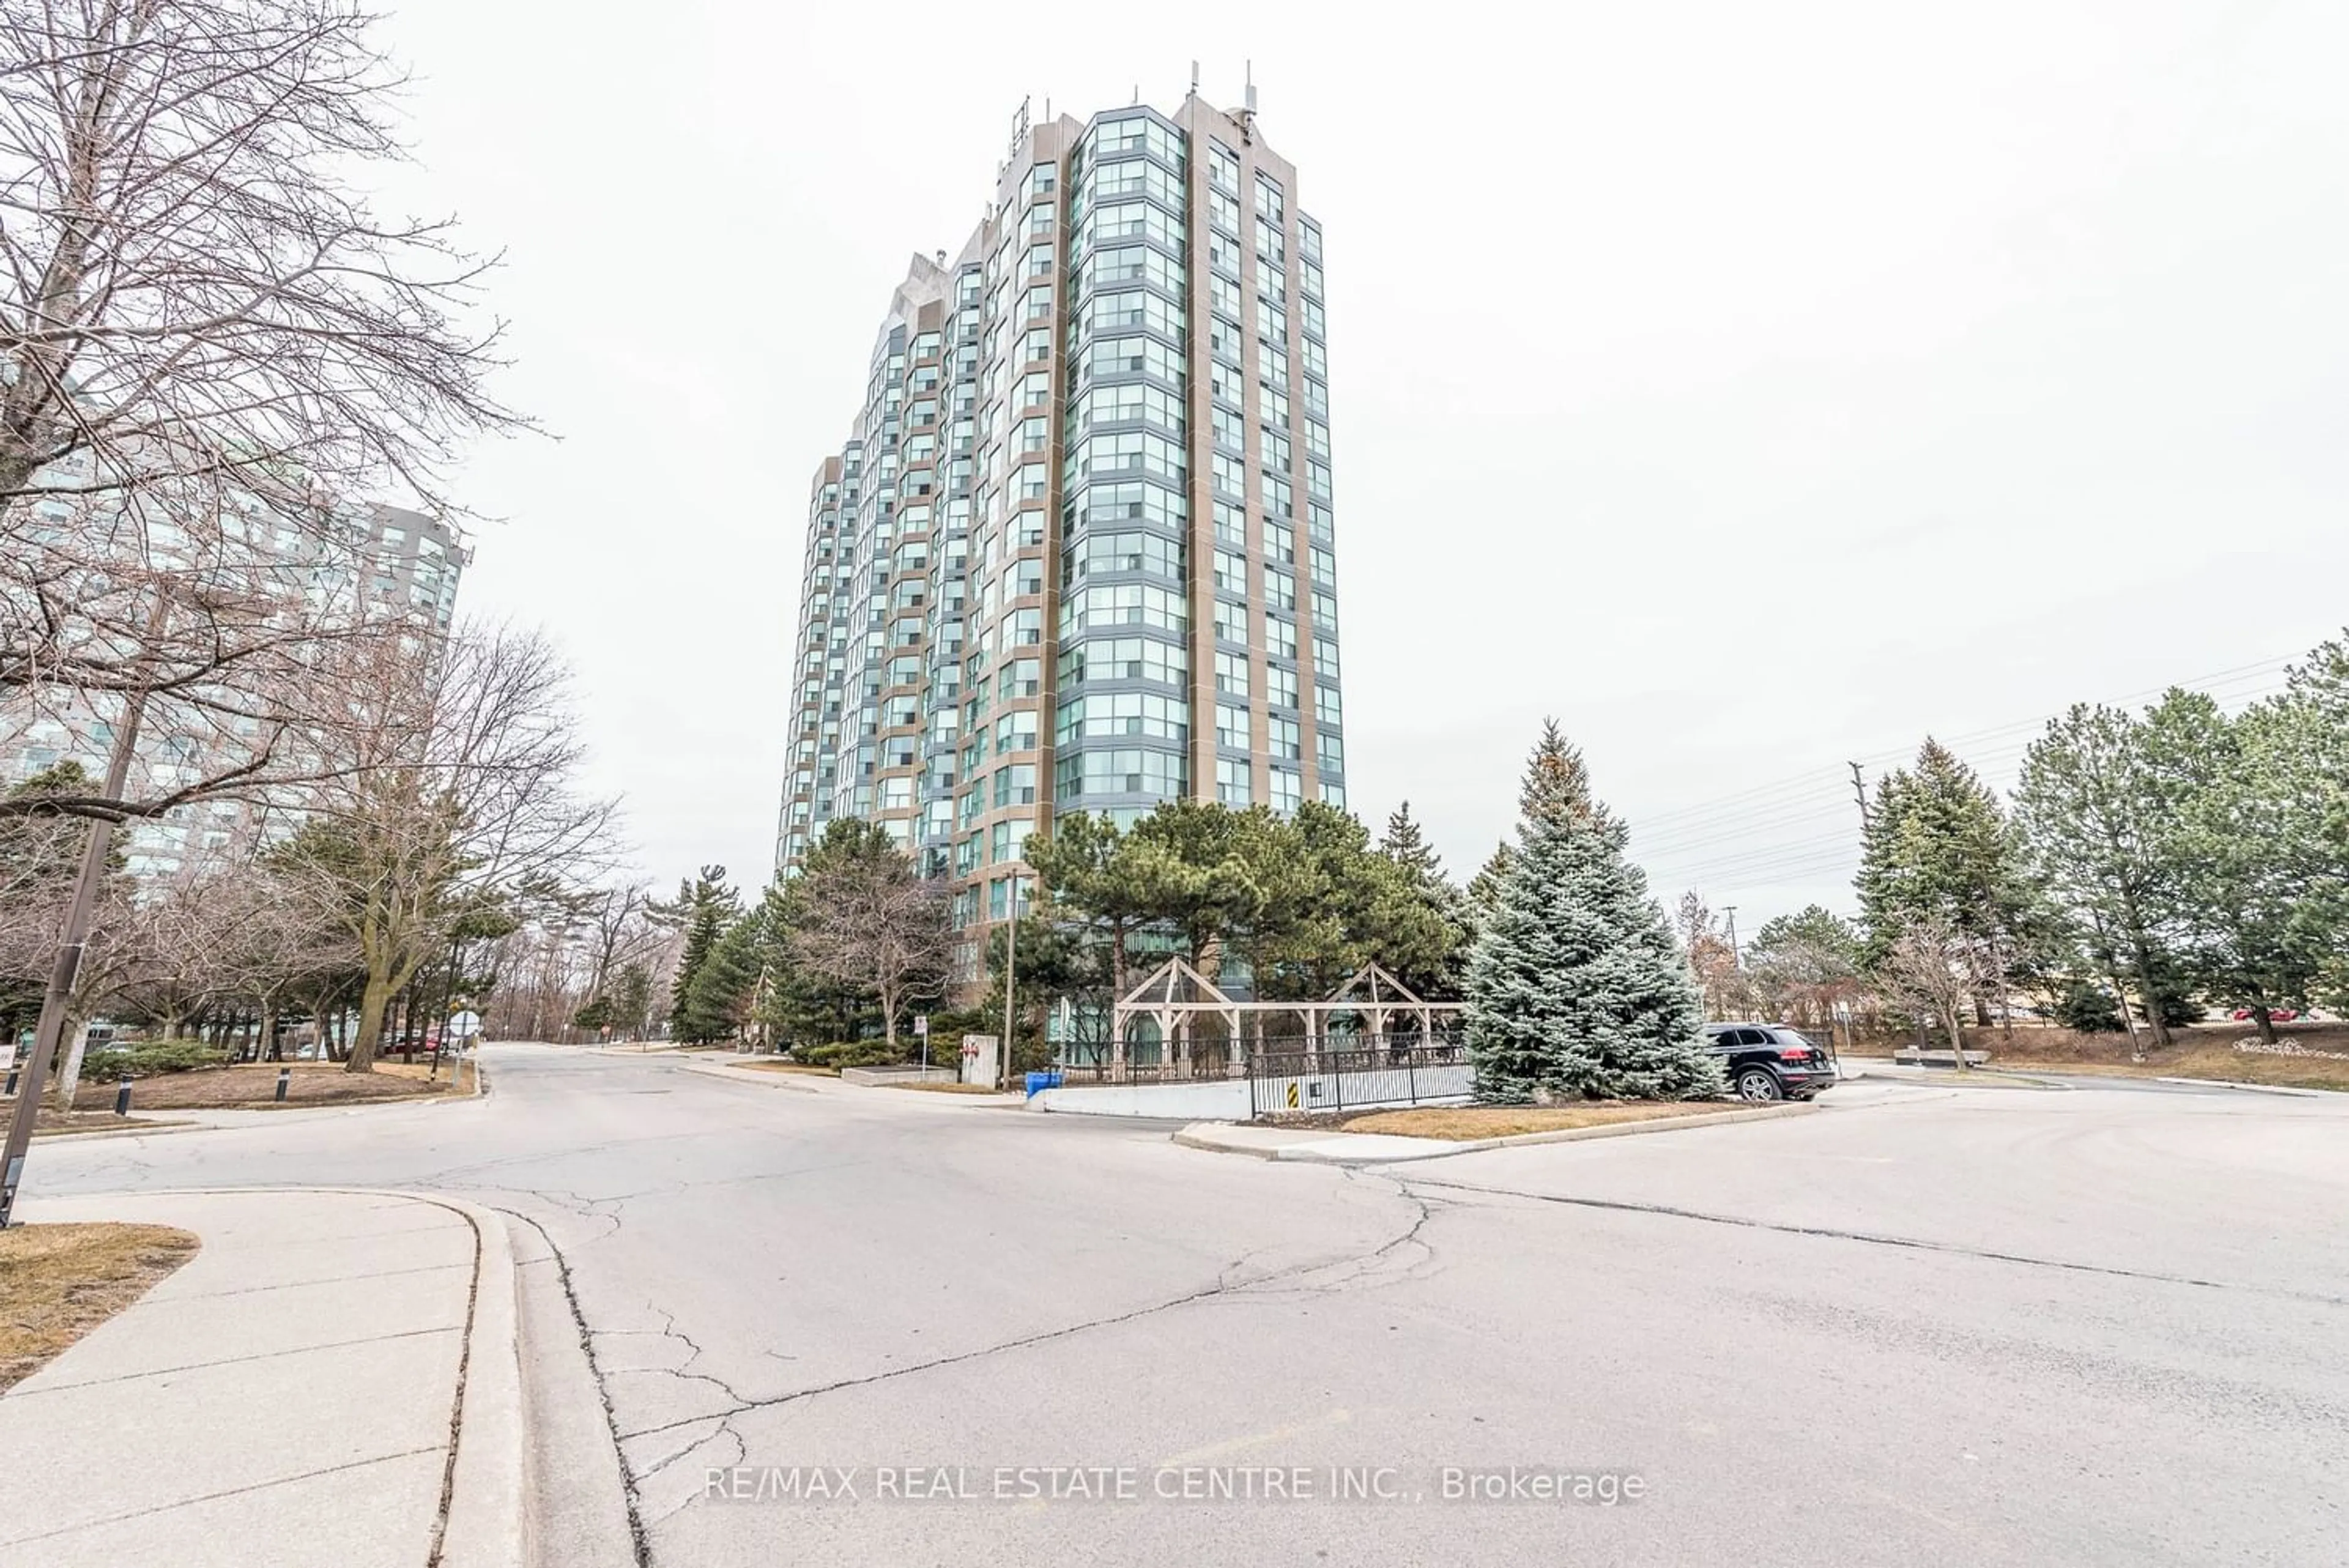 A pic from exterior of the house or condo for 2177 Burnhamthorpe Rd #1005, Mississauga Ontario L5L 5P9